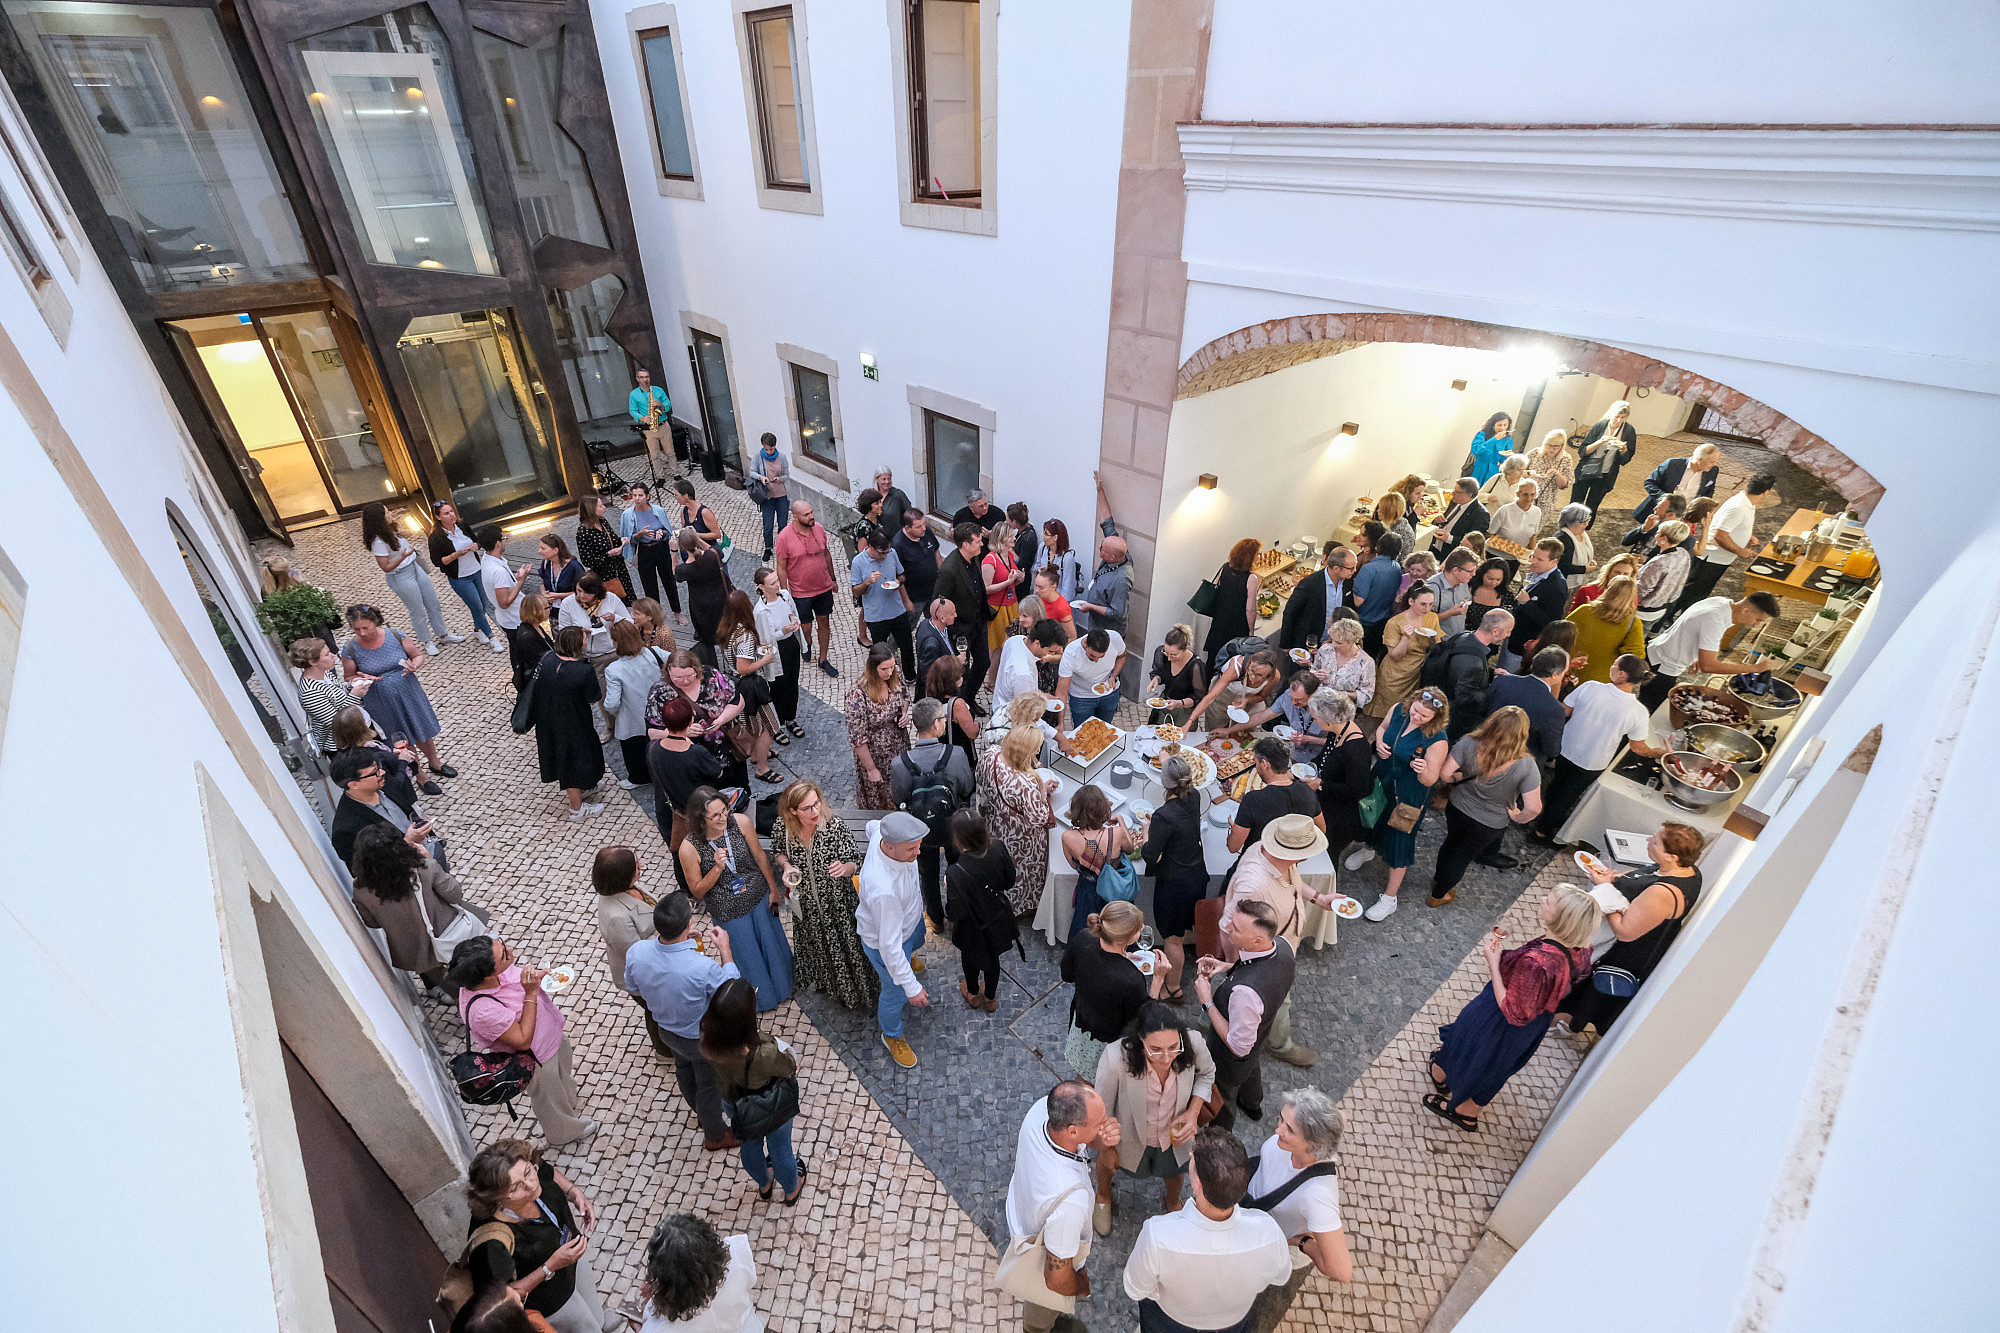 Photo taken from bird perspective of a large group of people standing inside a courtyard. Some people are standing by a buffet, others are socialising or eating.  © Image: Jorge Gomes